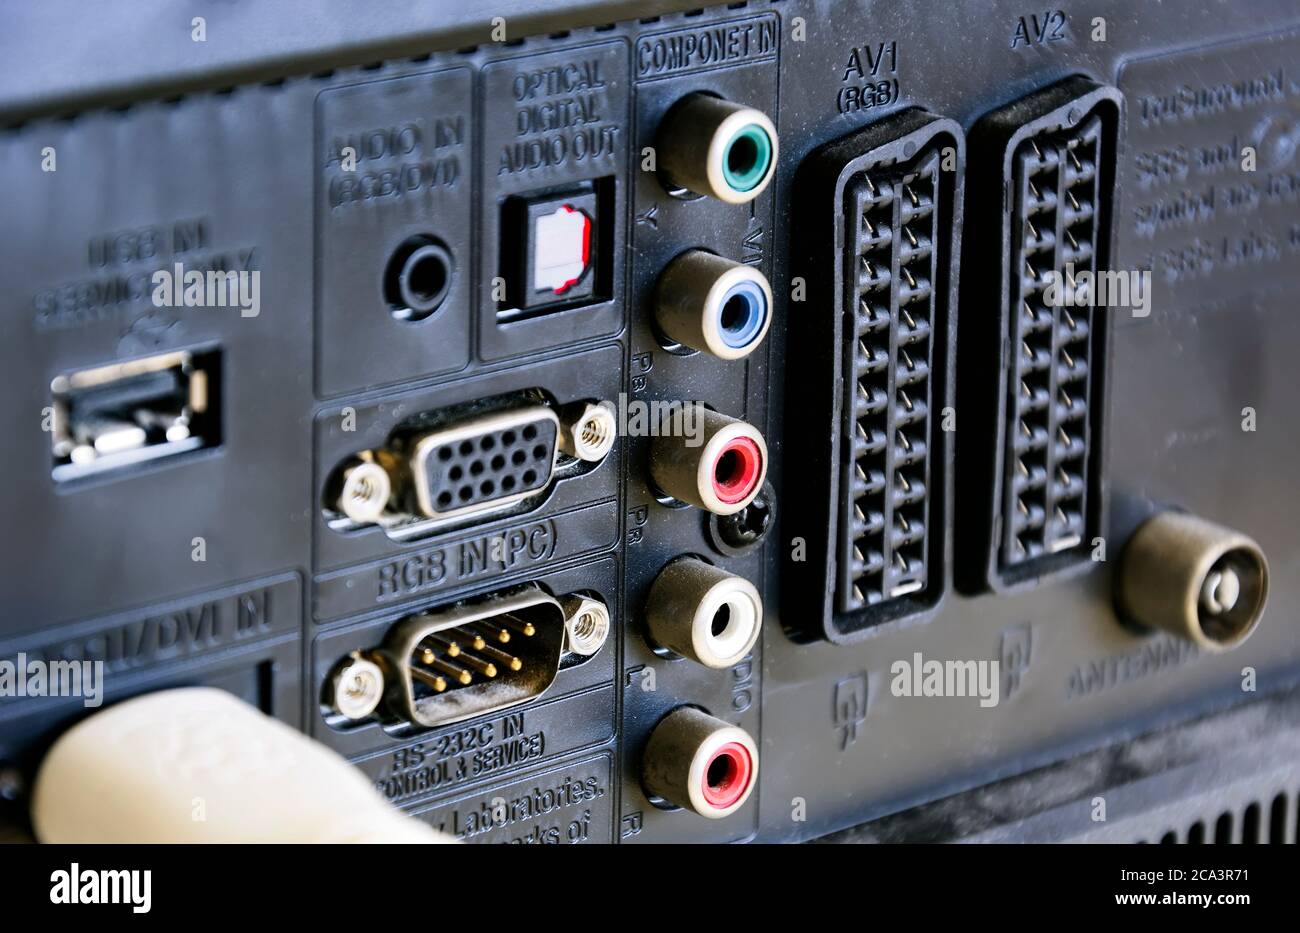 Rear panel of a television with sockets for audio / video, scart  connections and for rgb video input for the monitor. Technology and  connections betwe Stock Photo - Alamy